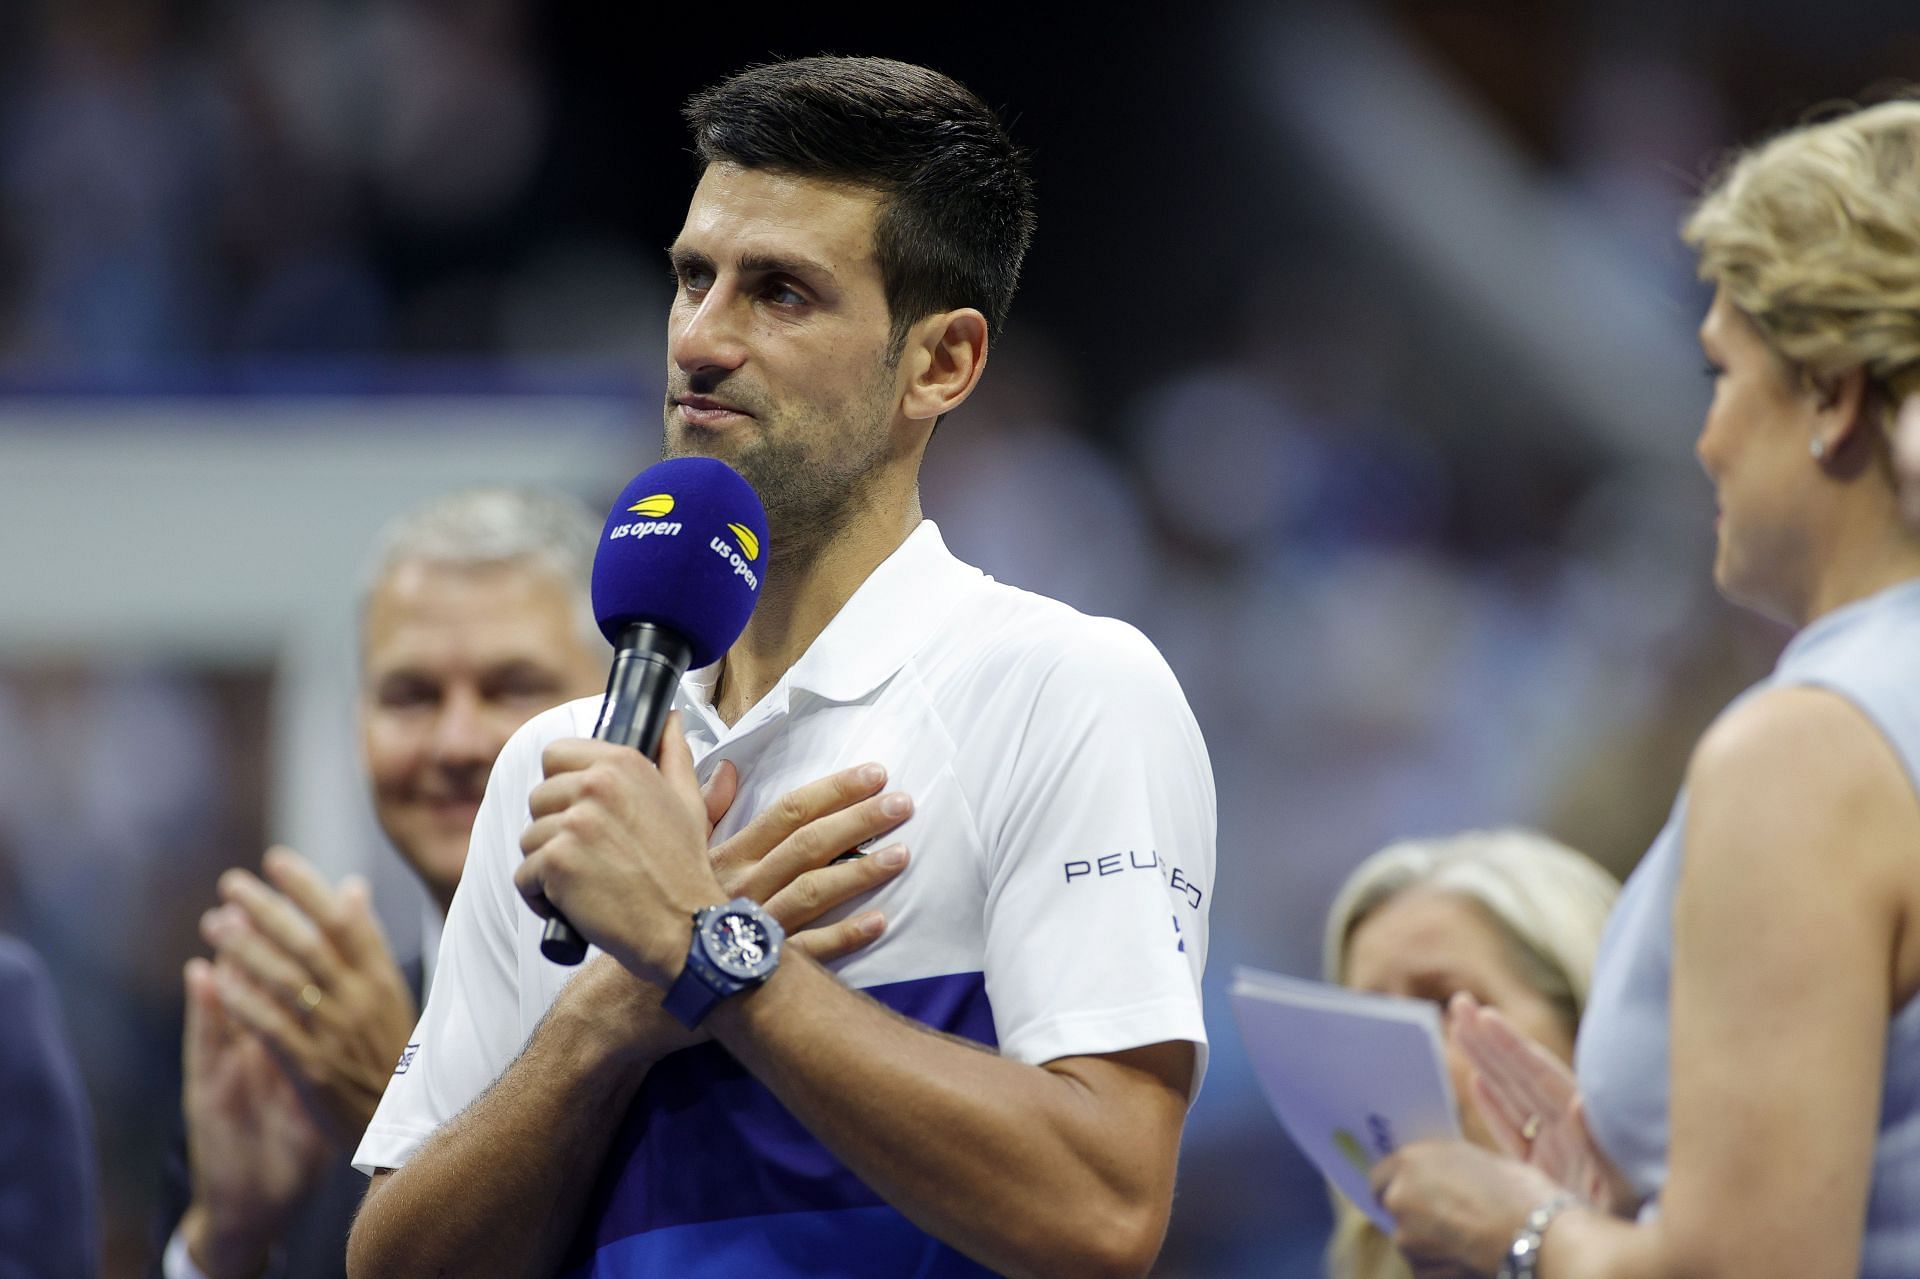 Novak Djokovic was the runner-up at the 2021 US Open